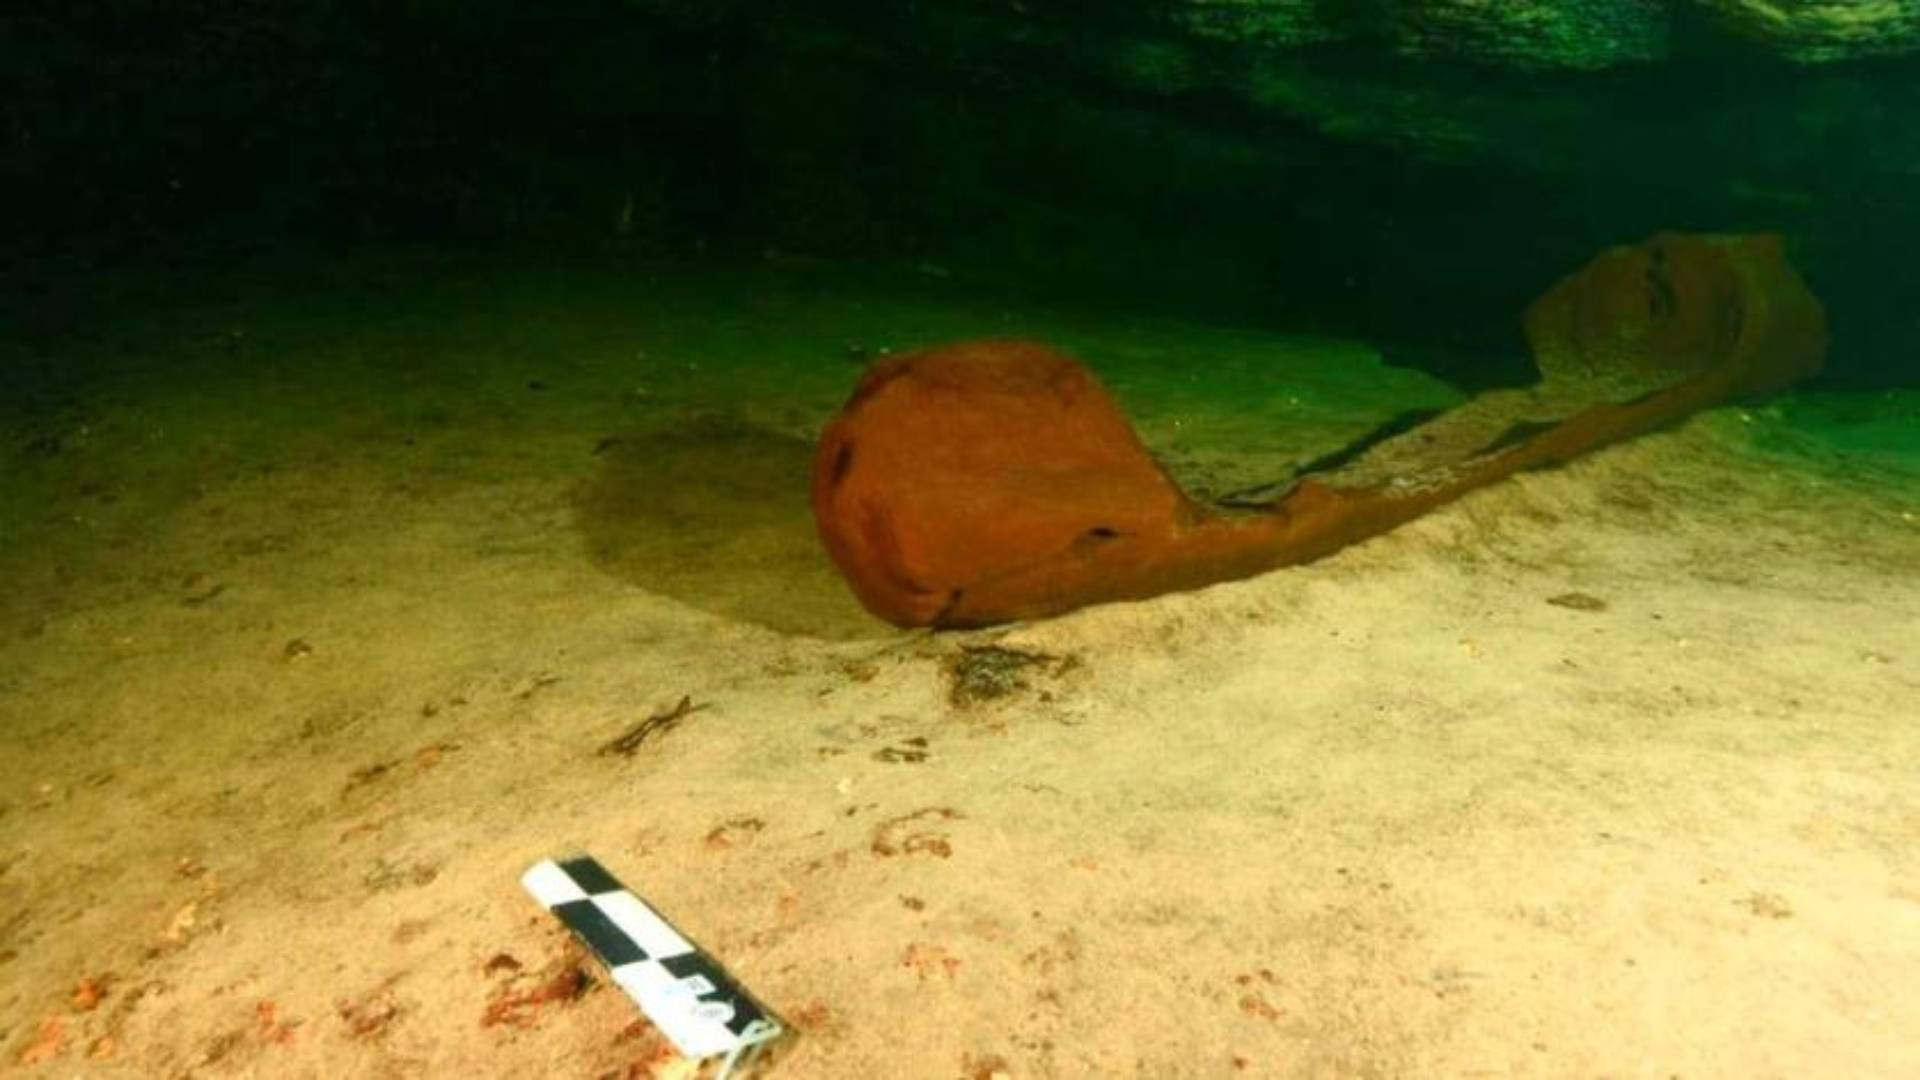  A wooden canoe used by the ancient Maya and believed to be over a thousand years old is pictured at a fresh-water pool known as a cenote and found during the archeological work, Mexico's National Institute of Anthropology and History (INAH)/Handout 